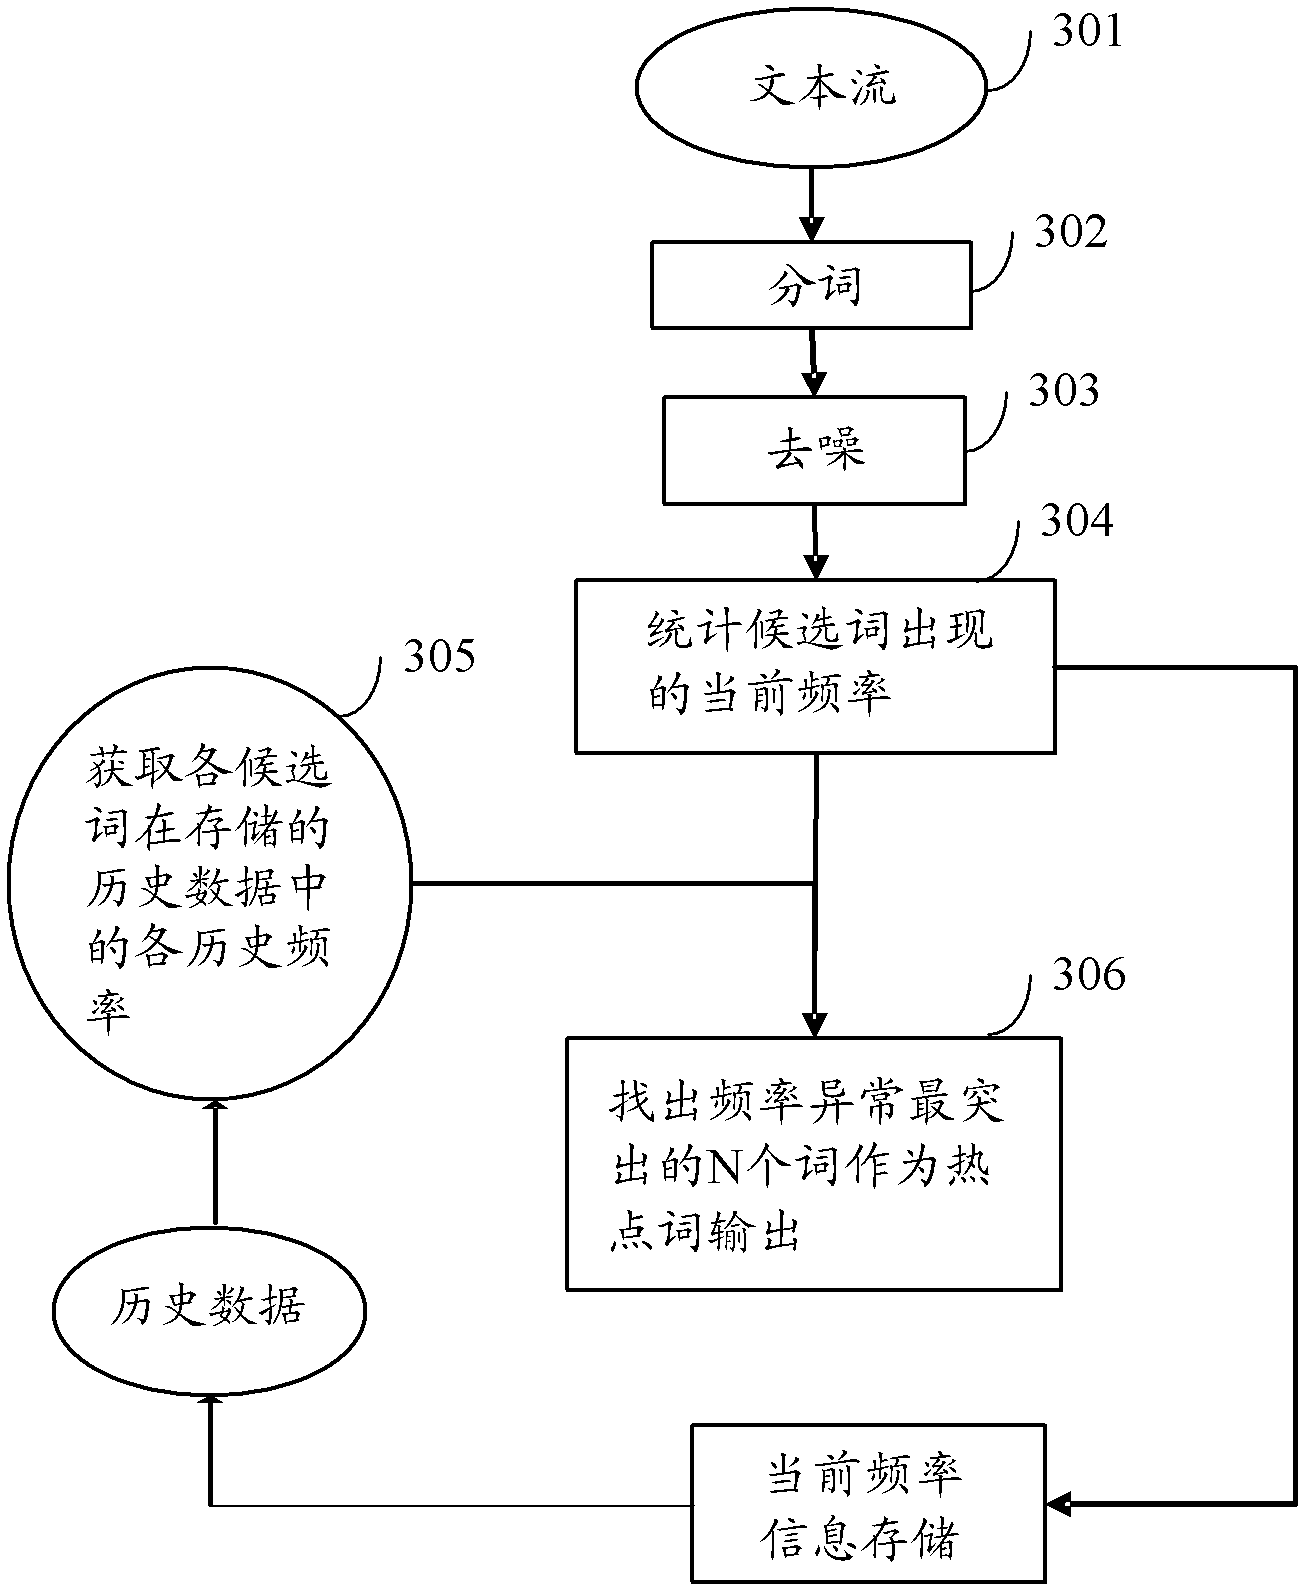 Method and device for mining hot-spot words